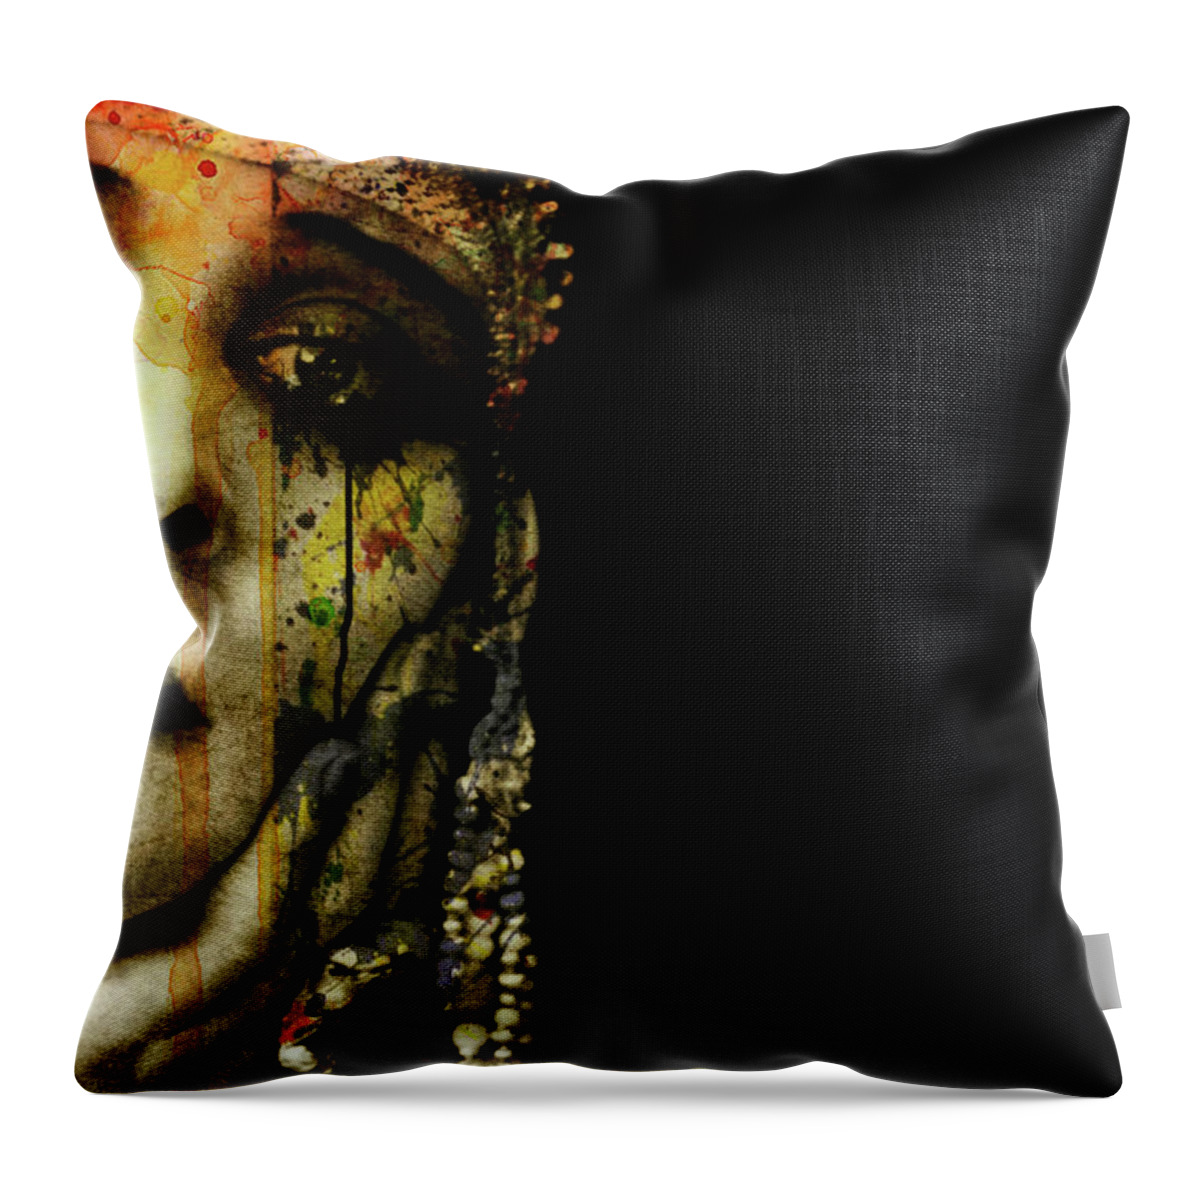 Hollywood Throw Pillow featuring the mixed media You Never Got To Hear Those Violins by Paul Lovering